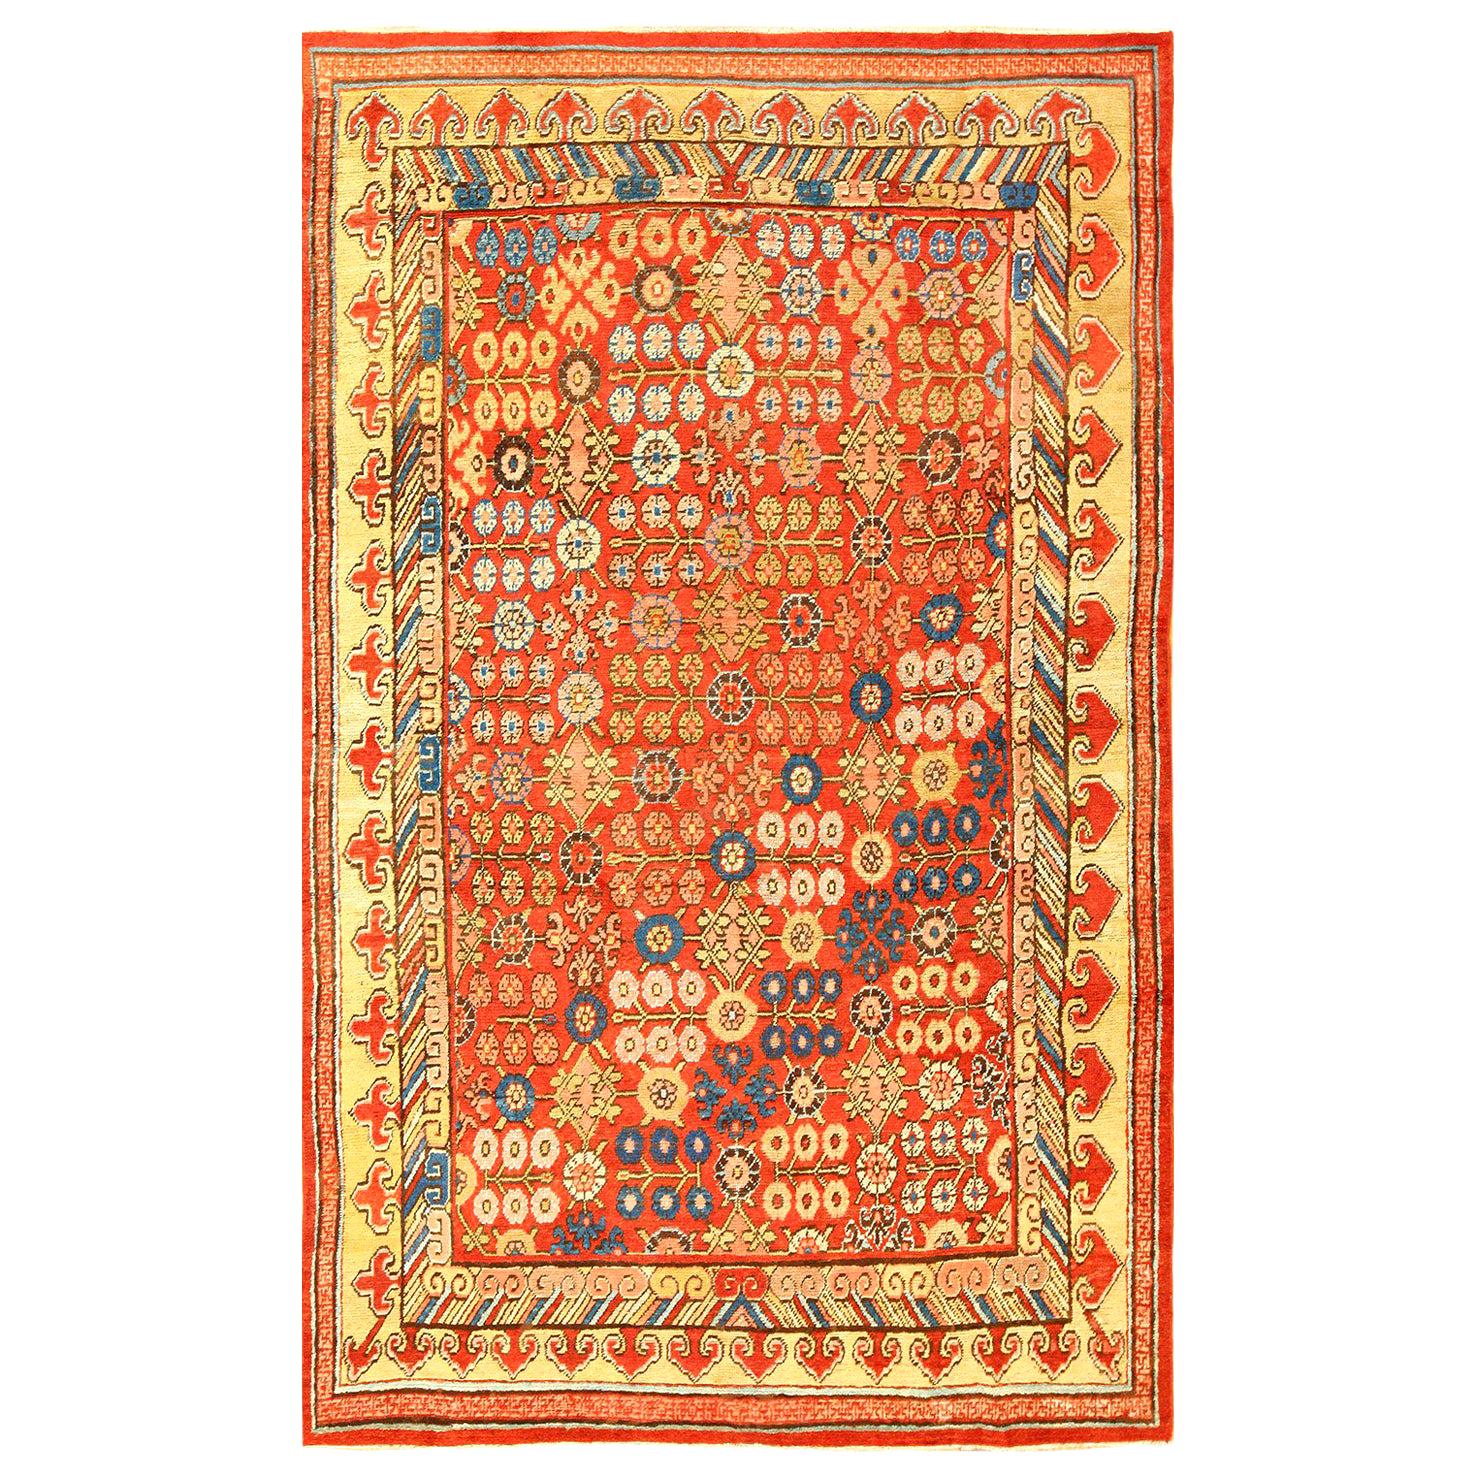 Nazmiyal Collection Antique 18th Century Khotan Rug. 5 ft 6 in x 8 ft 9 in 